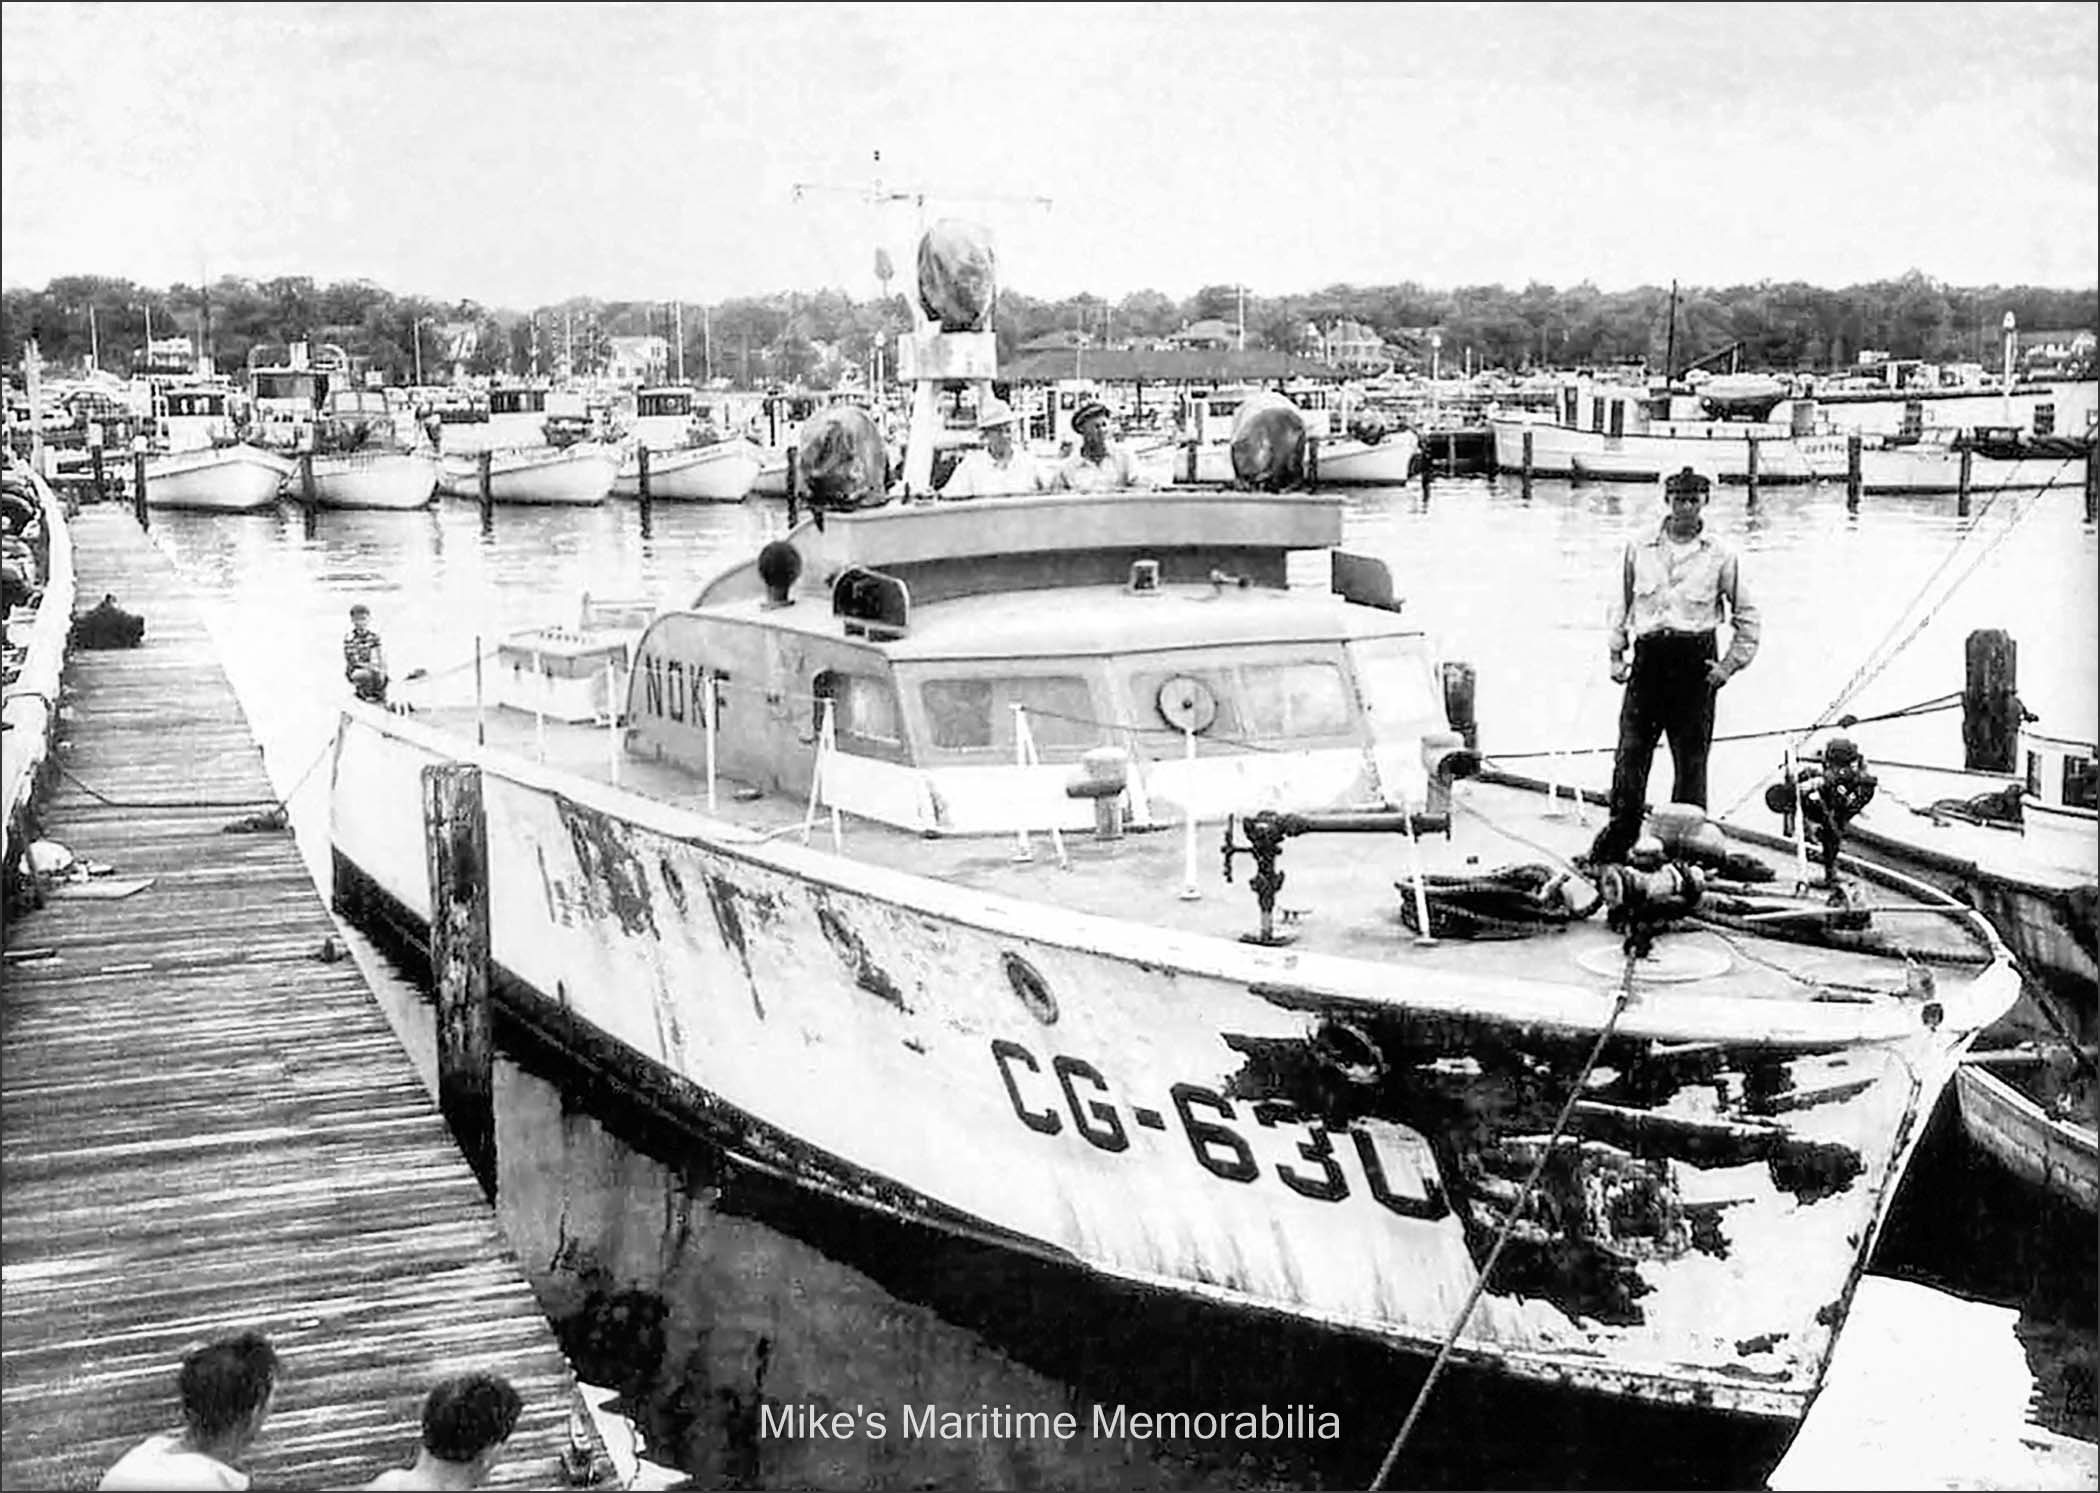 BOBBY II, Belmar, NJ – 1949 In 1944, a 63-foot Air Sea Rescue boat was built by the Herreshoff Manufacturing Co. at Bristol, RI as the U.S. Navy "C-77461" and later transferred to the U.S. ARMY as the "P-651" and then transferred to the U.S. Coast Guard as the "CG-63050". Five years later, in 1949, Captain Dave Shinn purchased the boat as surplus and converted it for party boat fishing. He named it the "BOBBY II". This photo shows the "BOBBY II" when she arrived at Belmar, NJ in 1949. She still had her US Coast Guard name "CG-63050" painted on her hull. In the right background is the "GERTRUDE H".